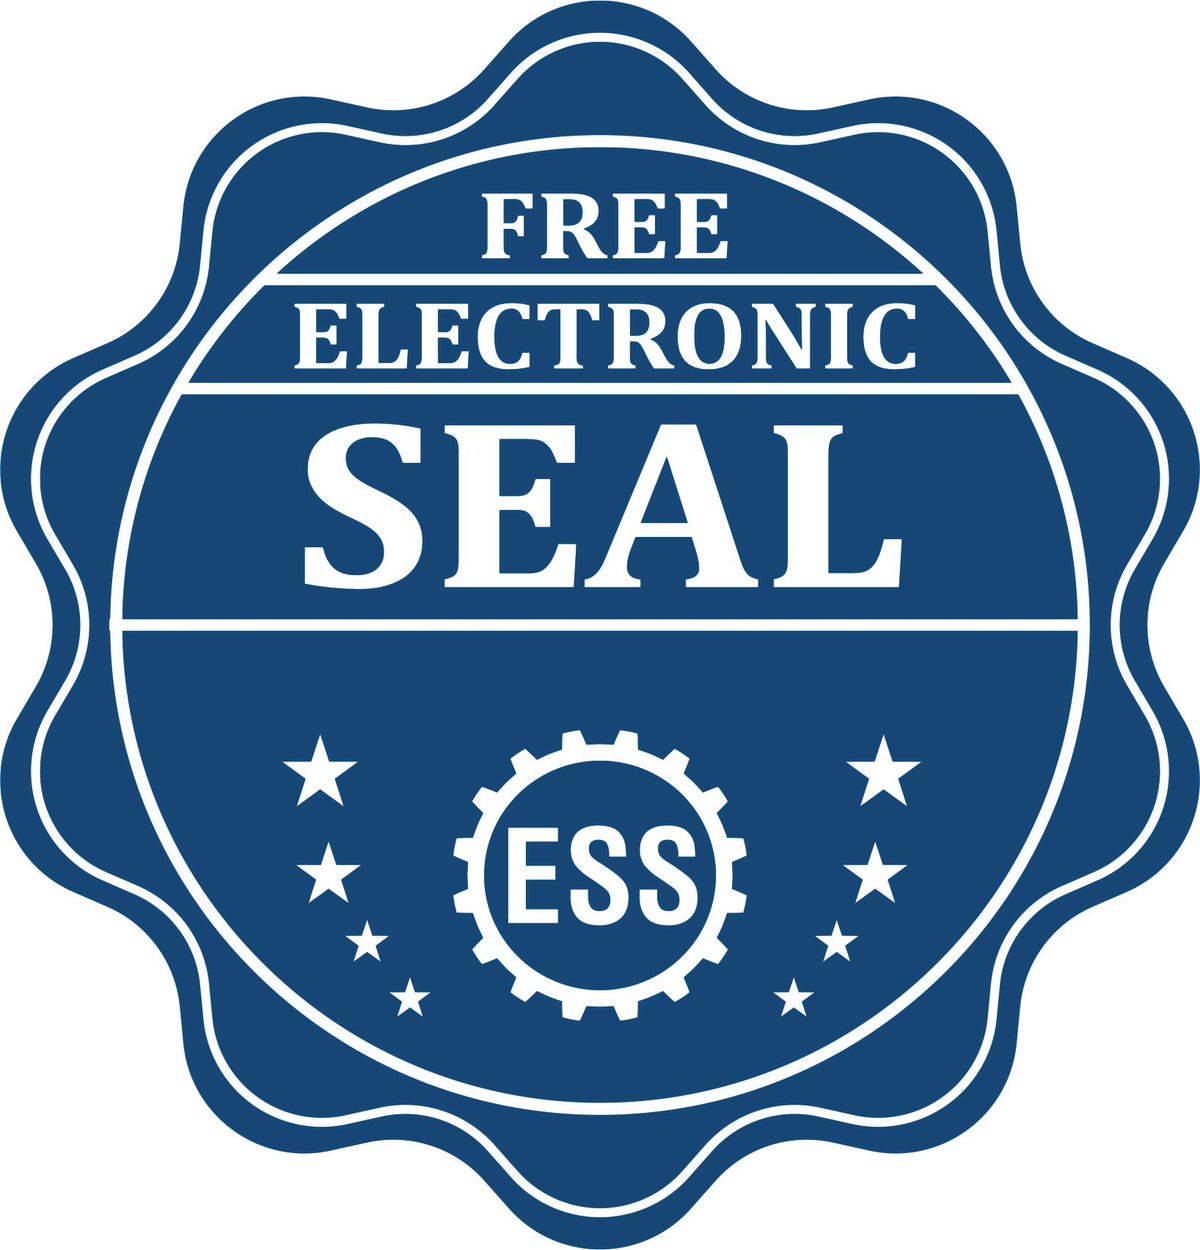 A badge showing a free electronic seal for the Handheld Vermont Professional Engineer Embosser with stars and the ESS gear on the emblem.